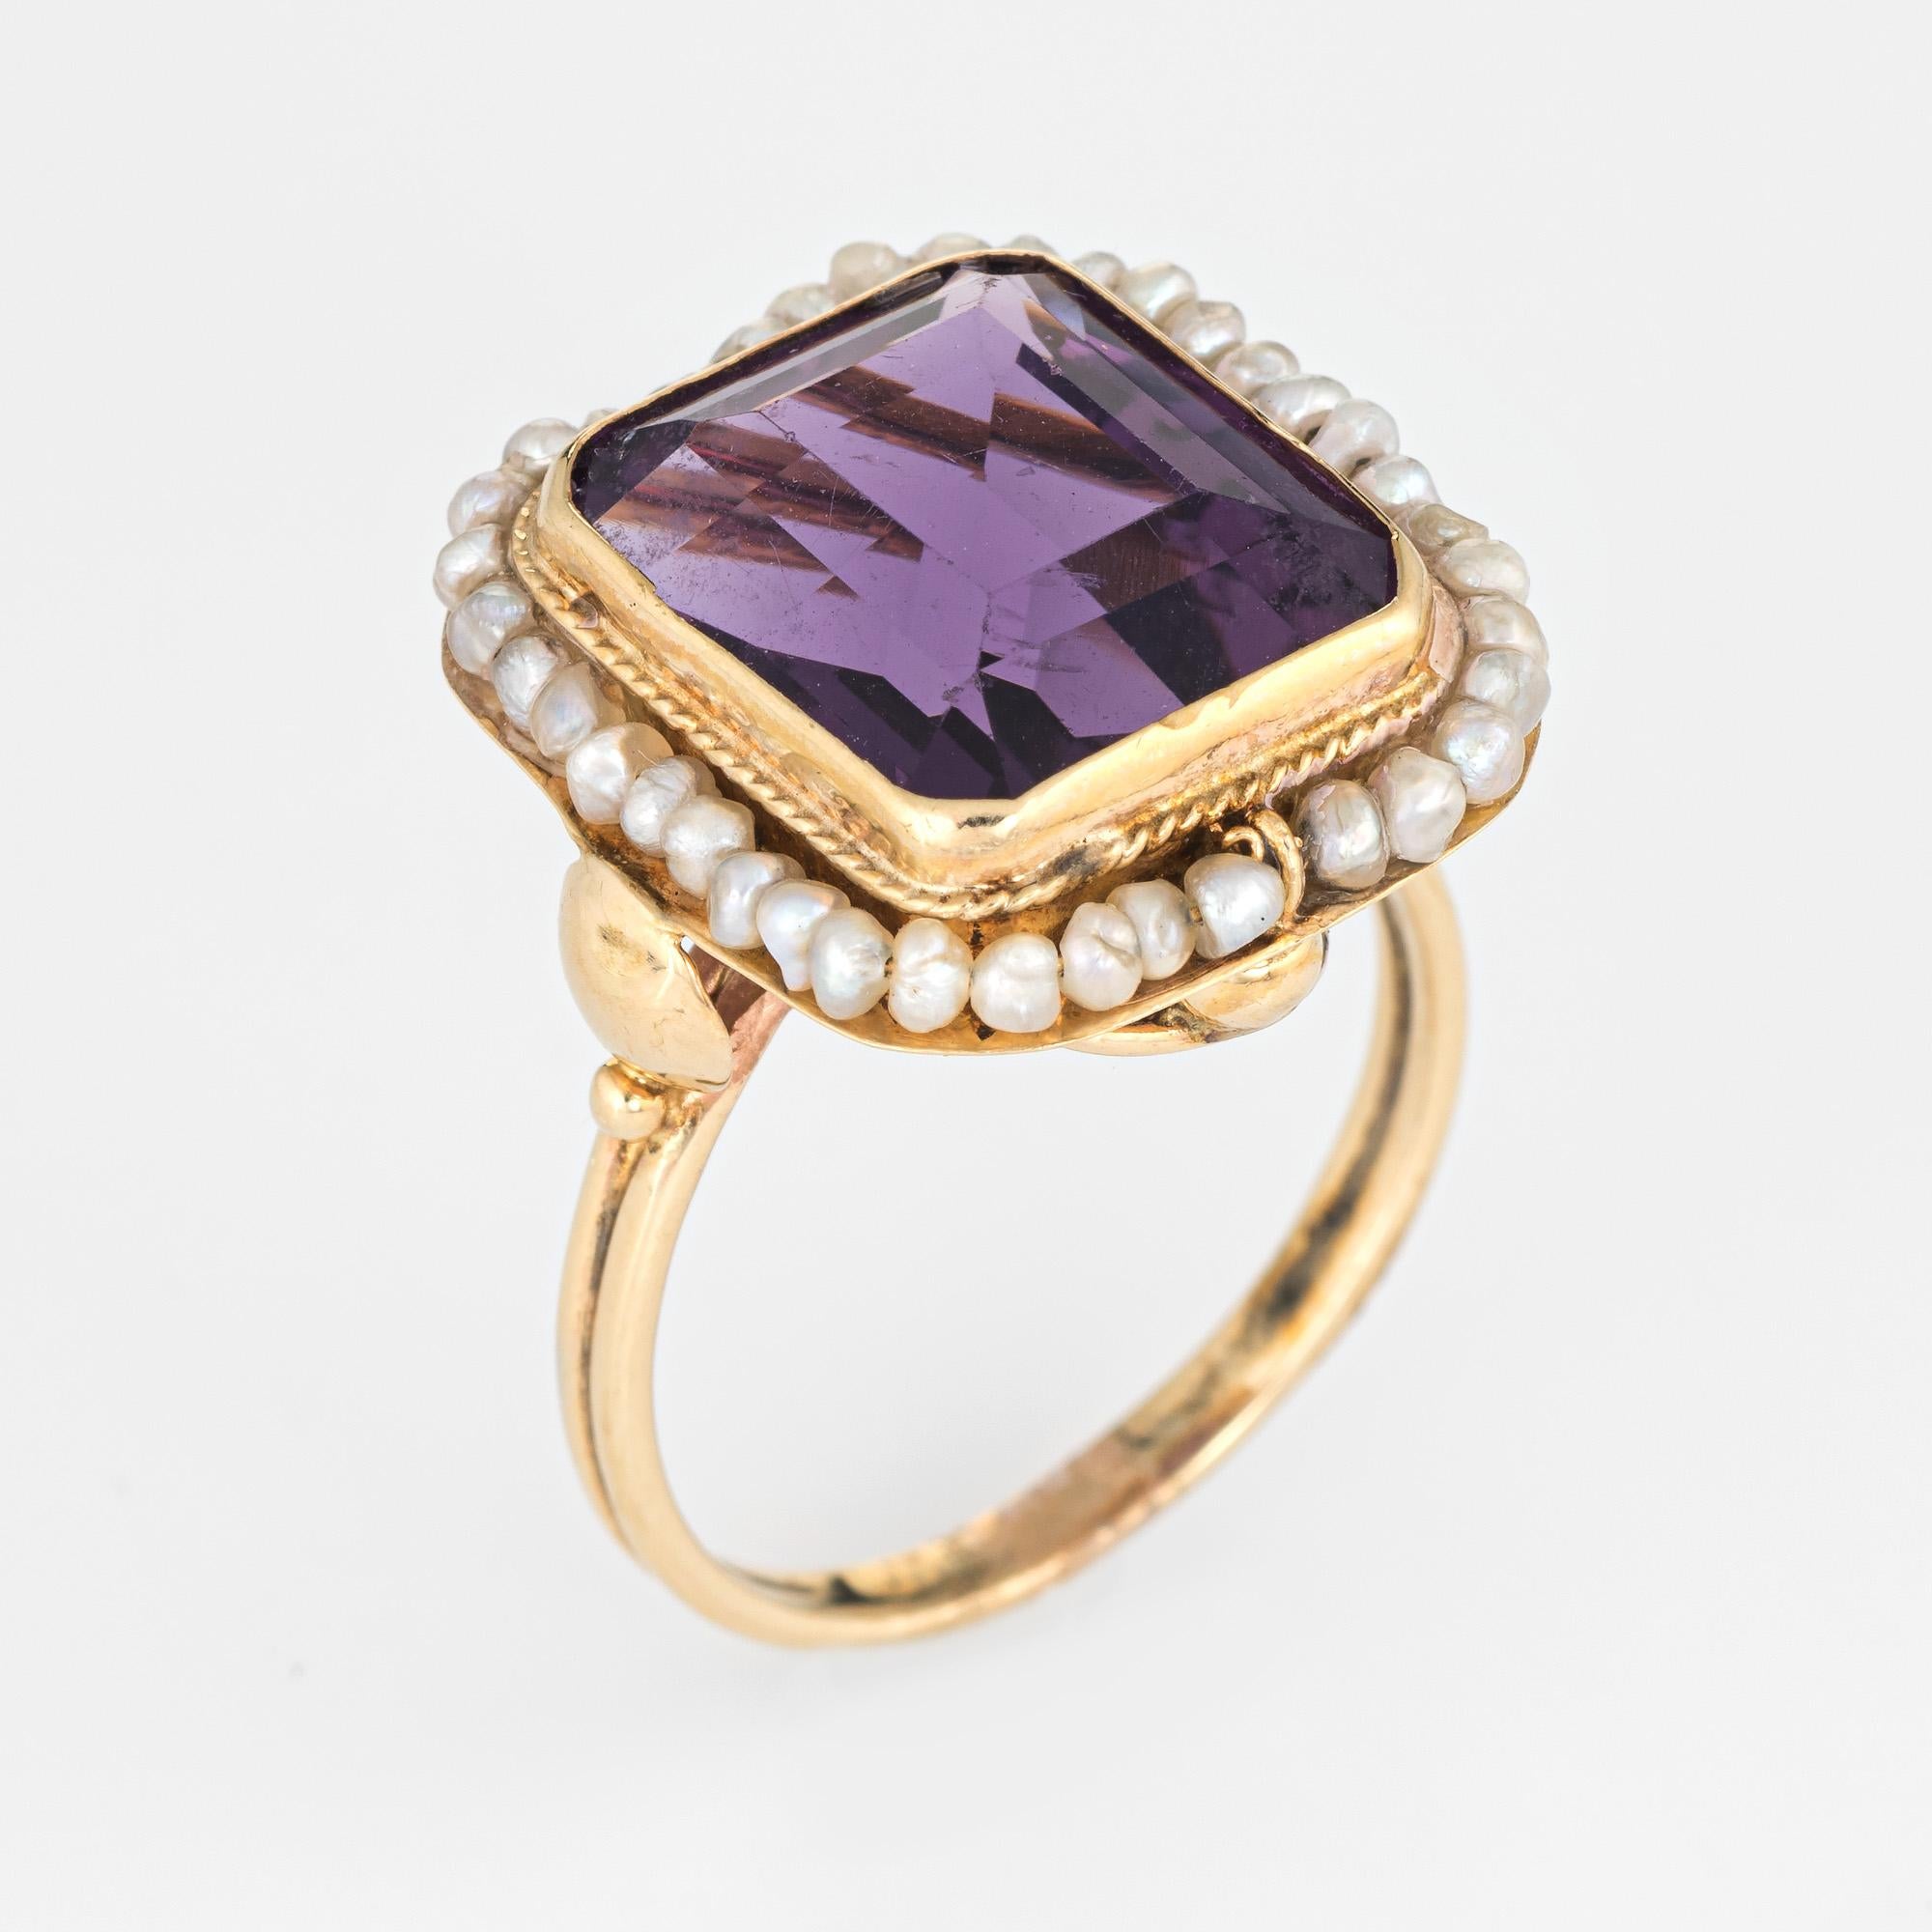 Stylish vintage amethyst cocktail ring (circa 1950s to 1960s) crafted in 14 karat yellow gold. 

Faceted square cut amethyst measures 13mm x 11mm (estimated at 8.50 carats), accented with natural seed pearls. Note: slight chip to the amethyst